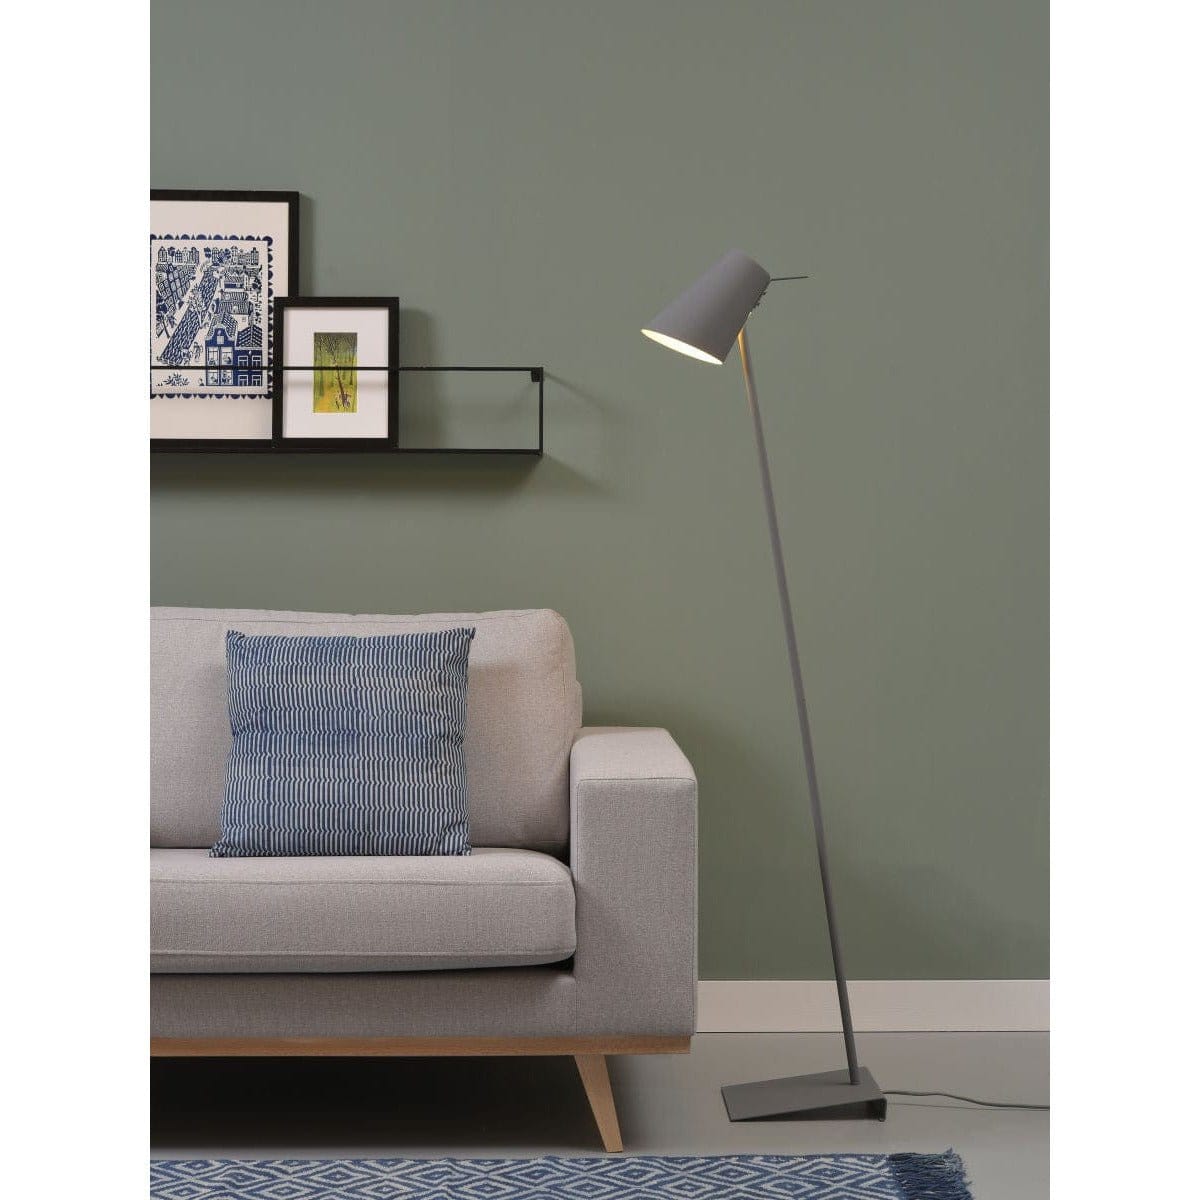 It's About RoMi Floor Lamp Cardiff Rubber Finish Floor Lamp, white, grey or black